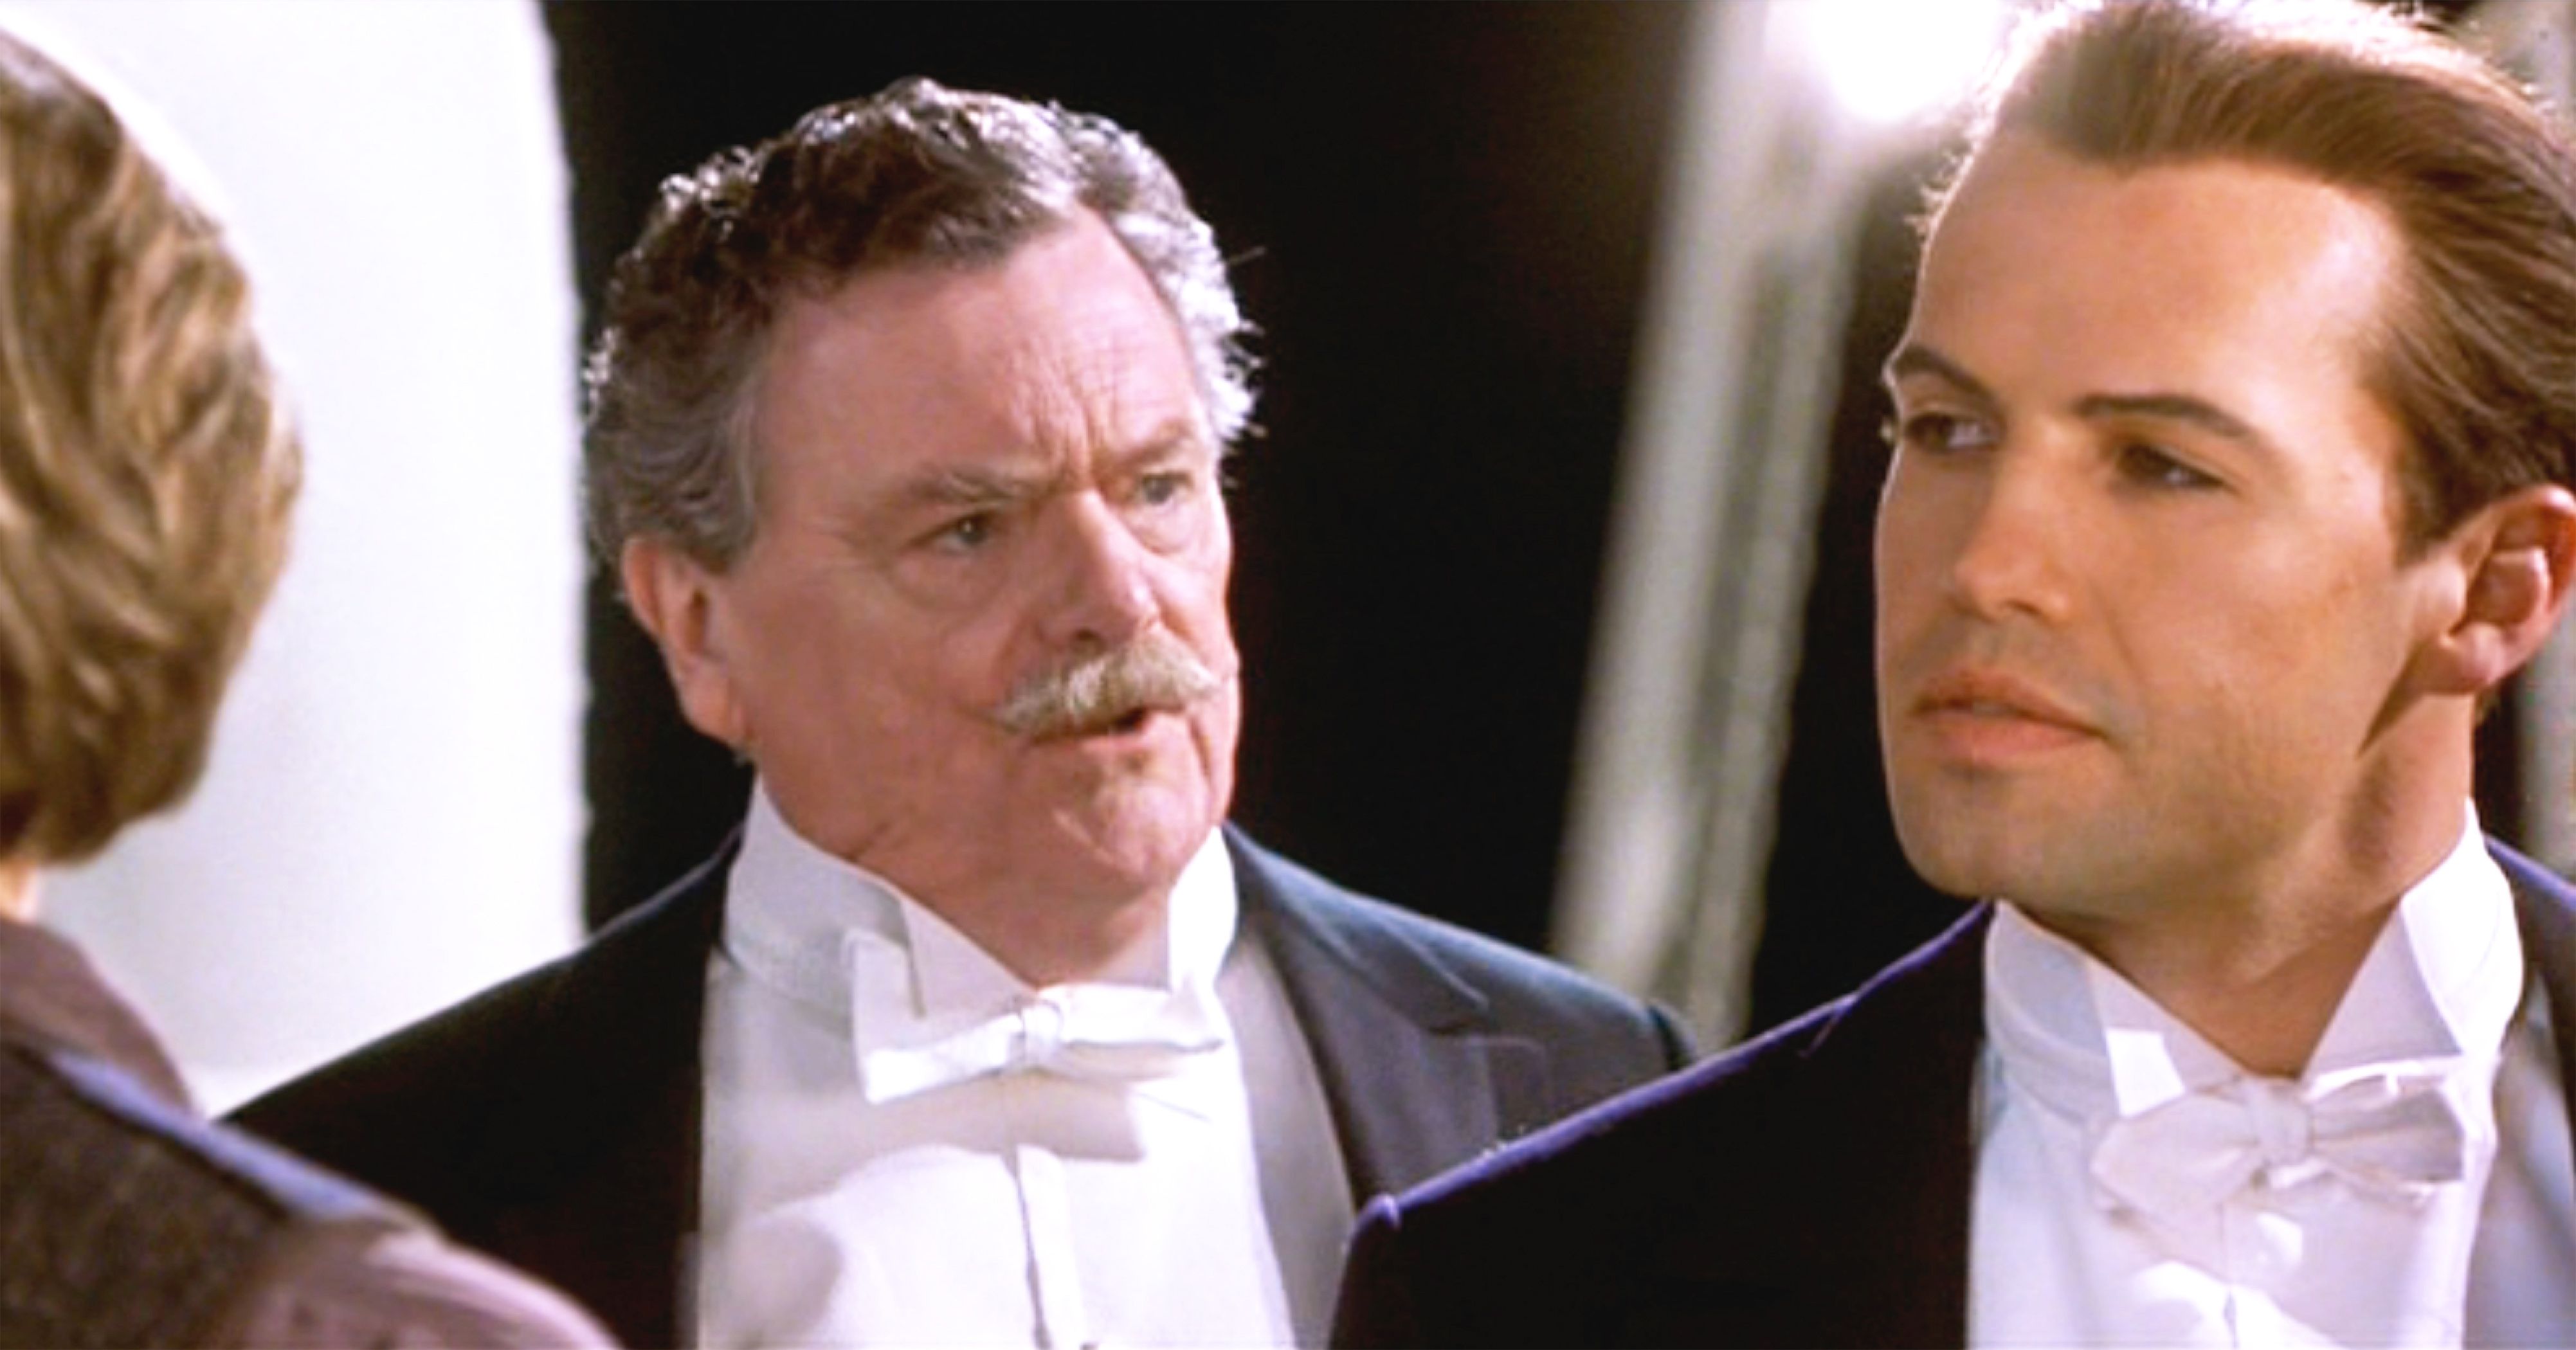 19 Photos of Titanic Characters With Their Real-Life Counterparts